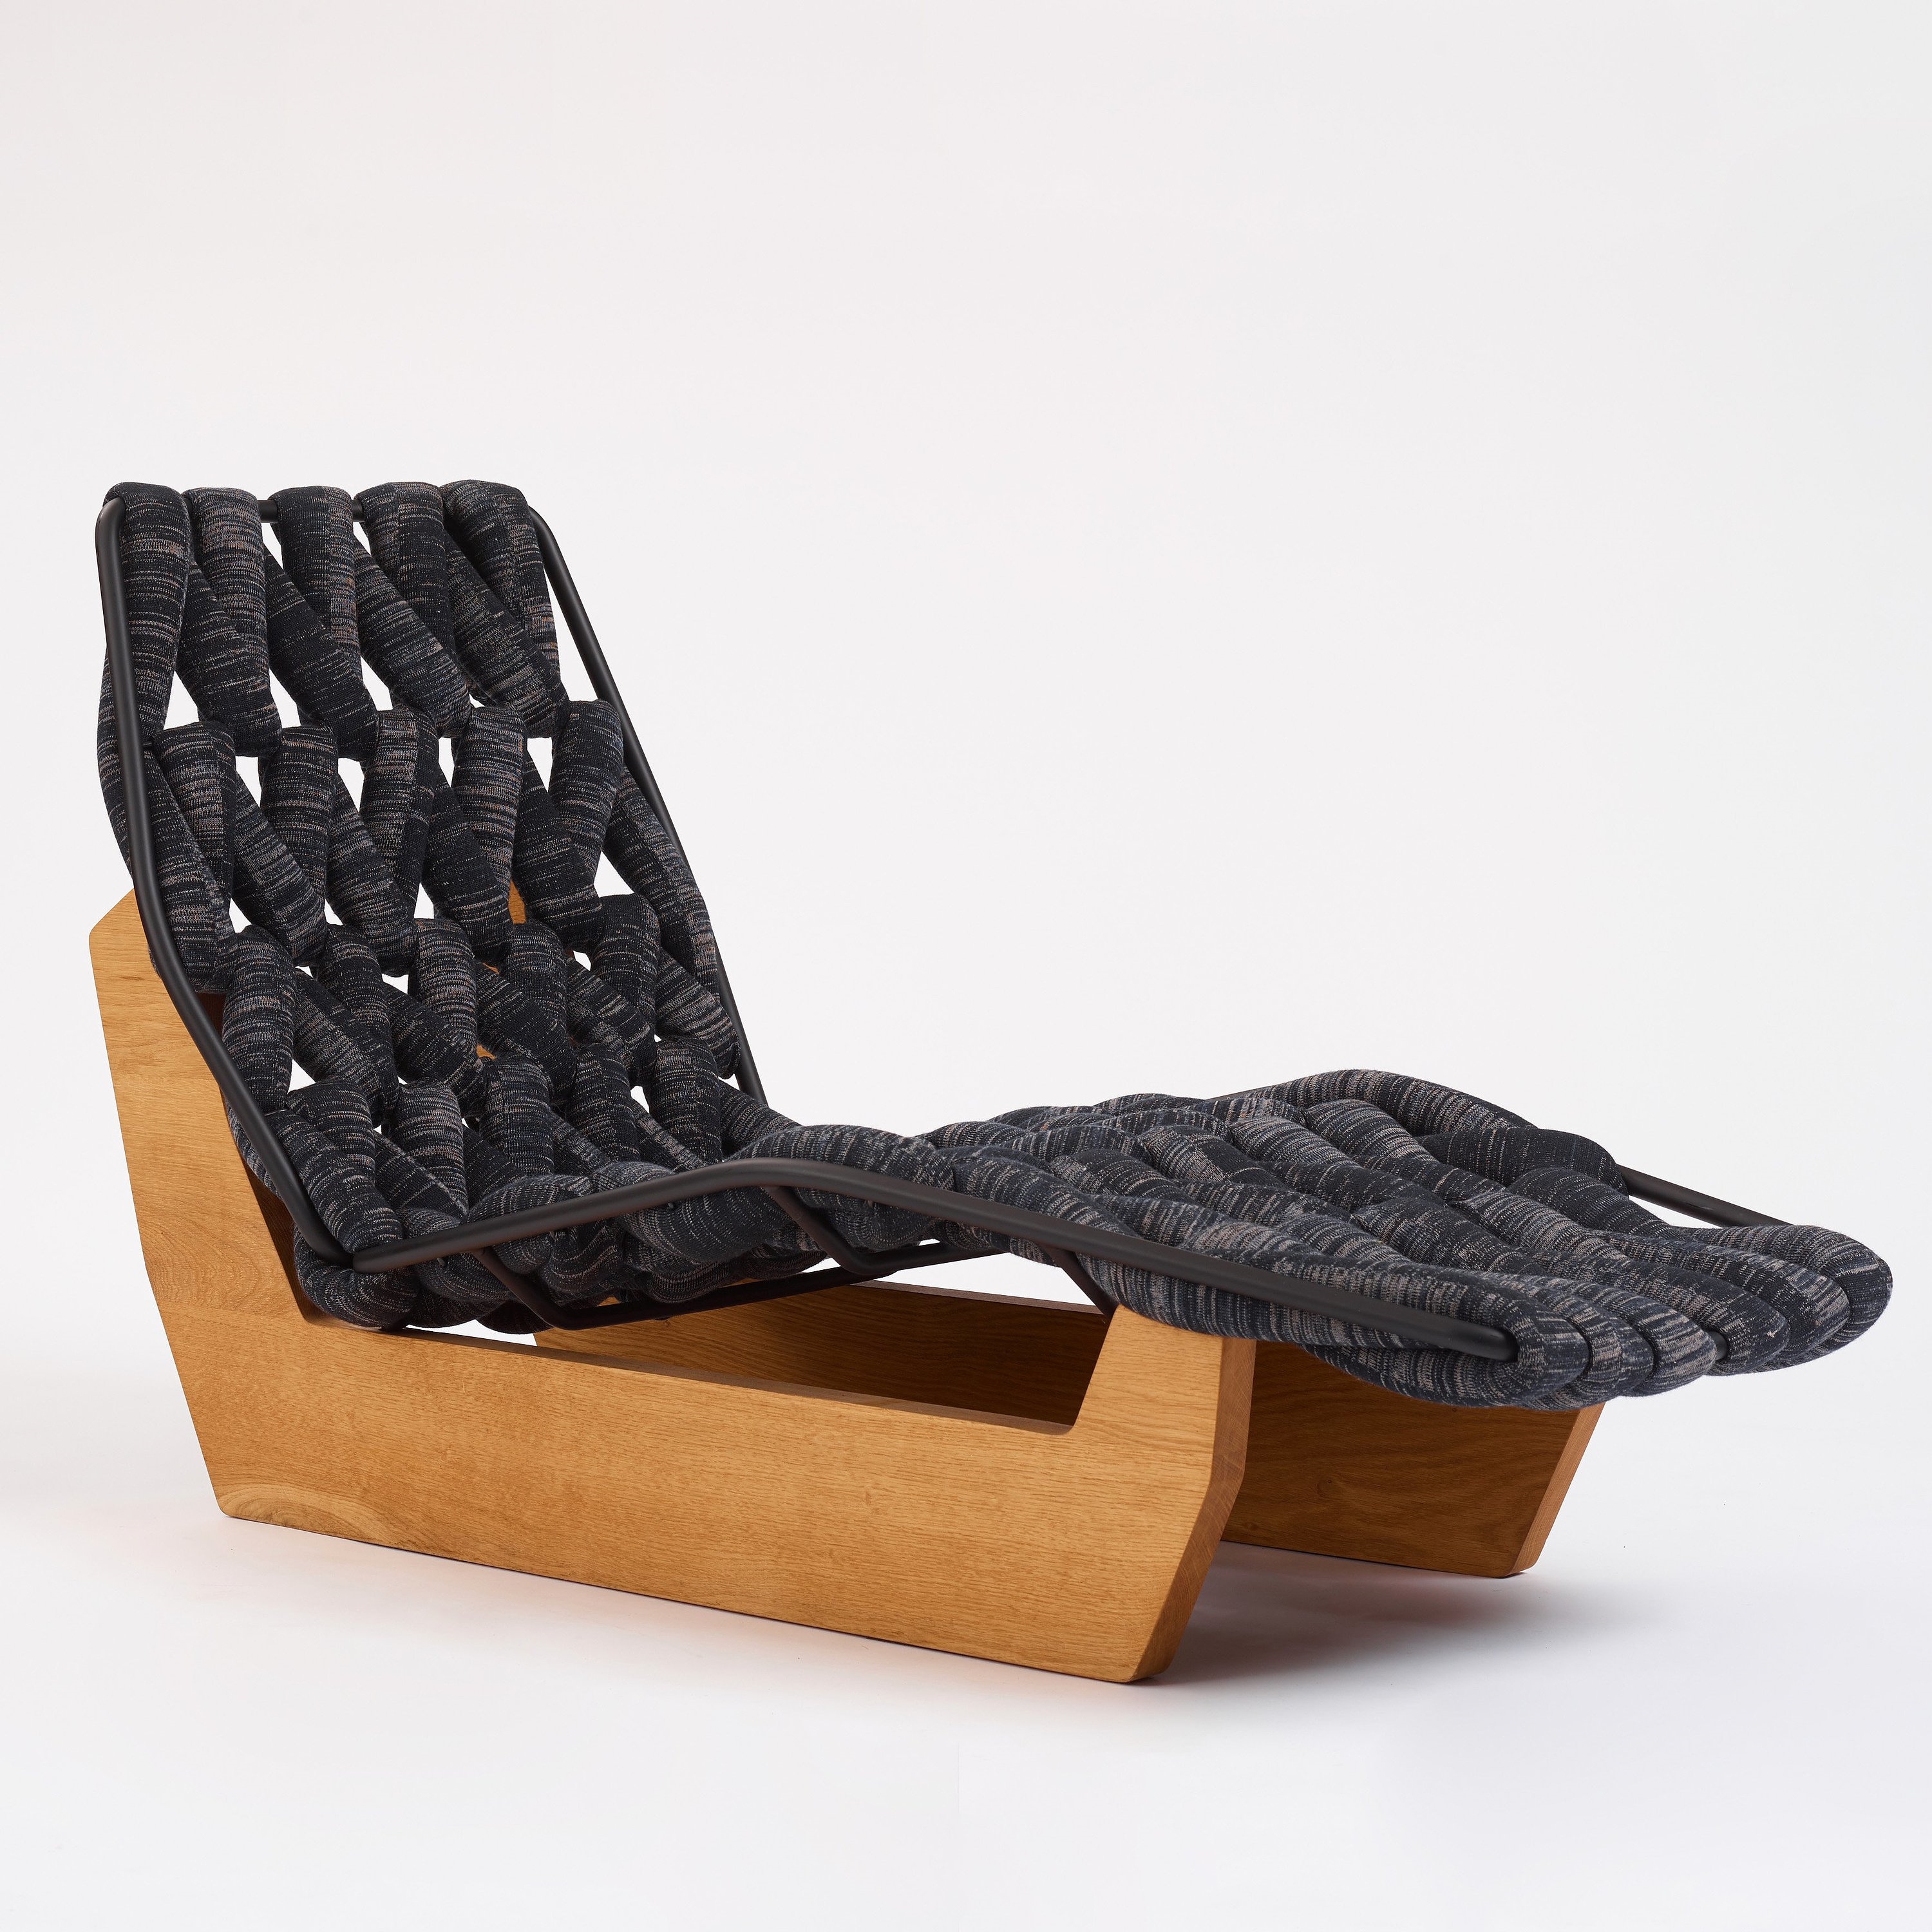 Artwork by Patricia Urquiola, 'Biknit', chaise longue, Made of black and grey textile